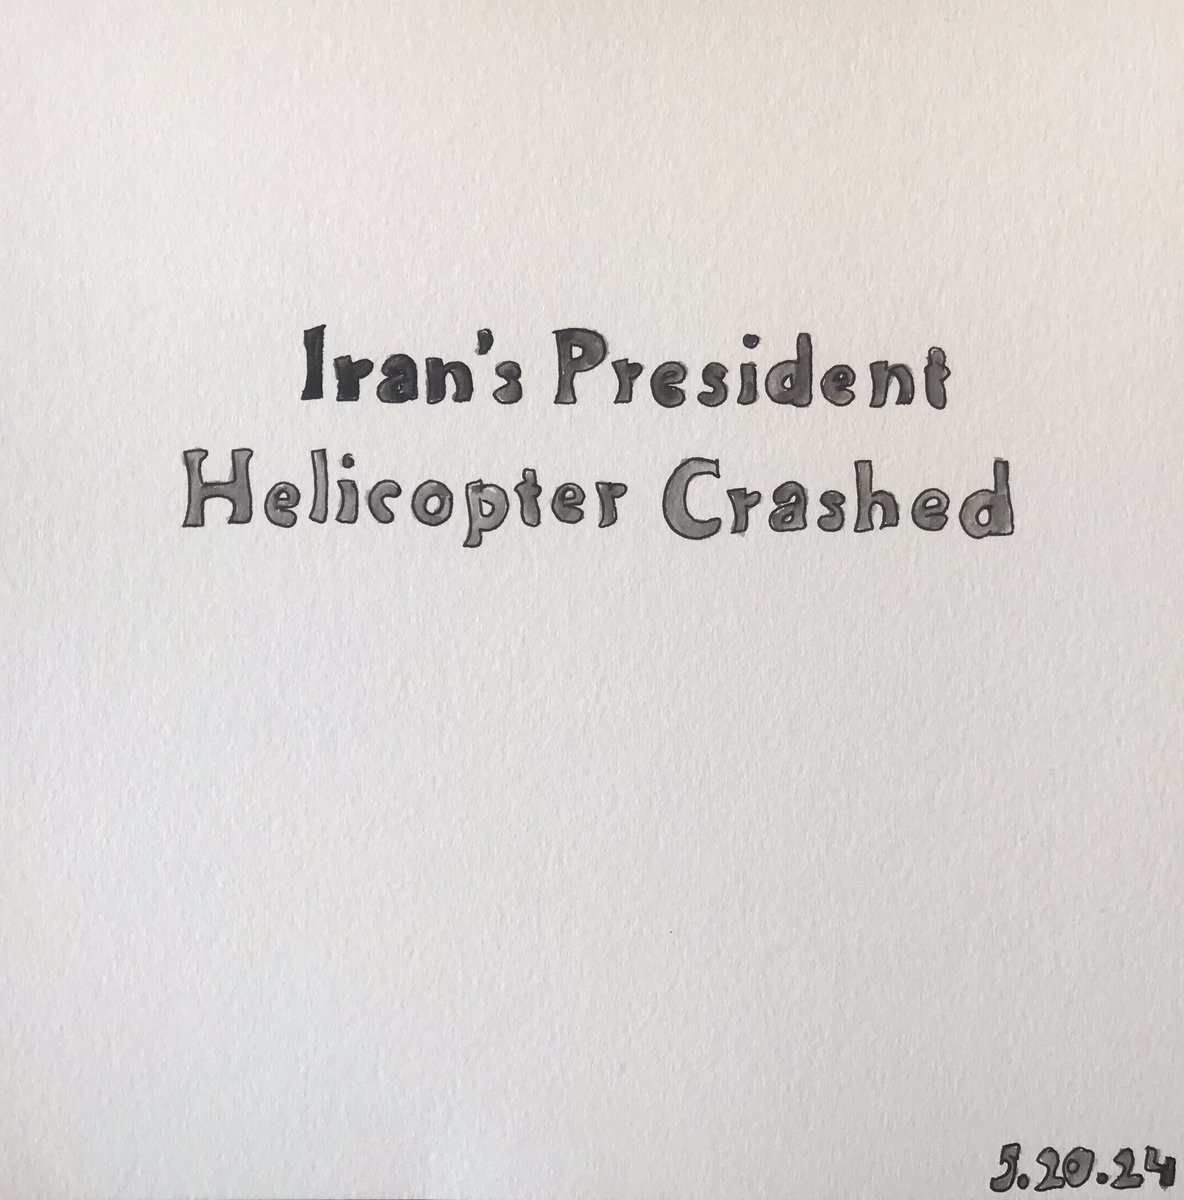 #IransPresidentHelicopter Crashed #NYT #May20_24 . #Helicopter Carrying #Iran #President has #Crashed , State Media Reports @farnazfassihi nytimes.com/2024/05/19/wor…